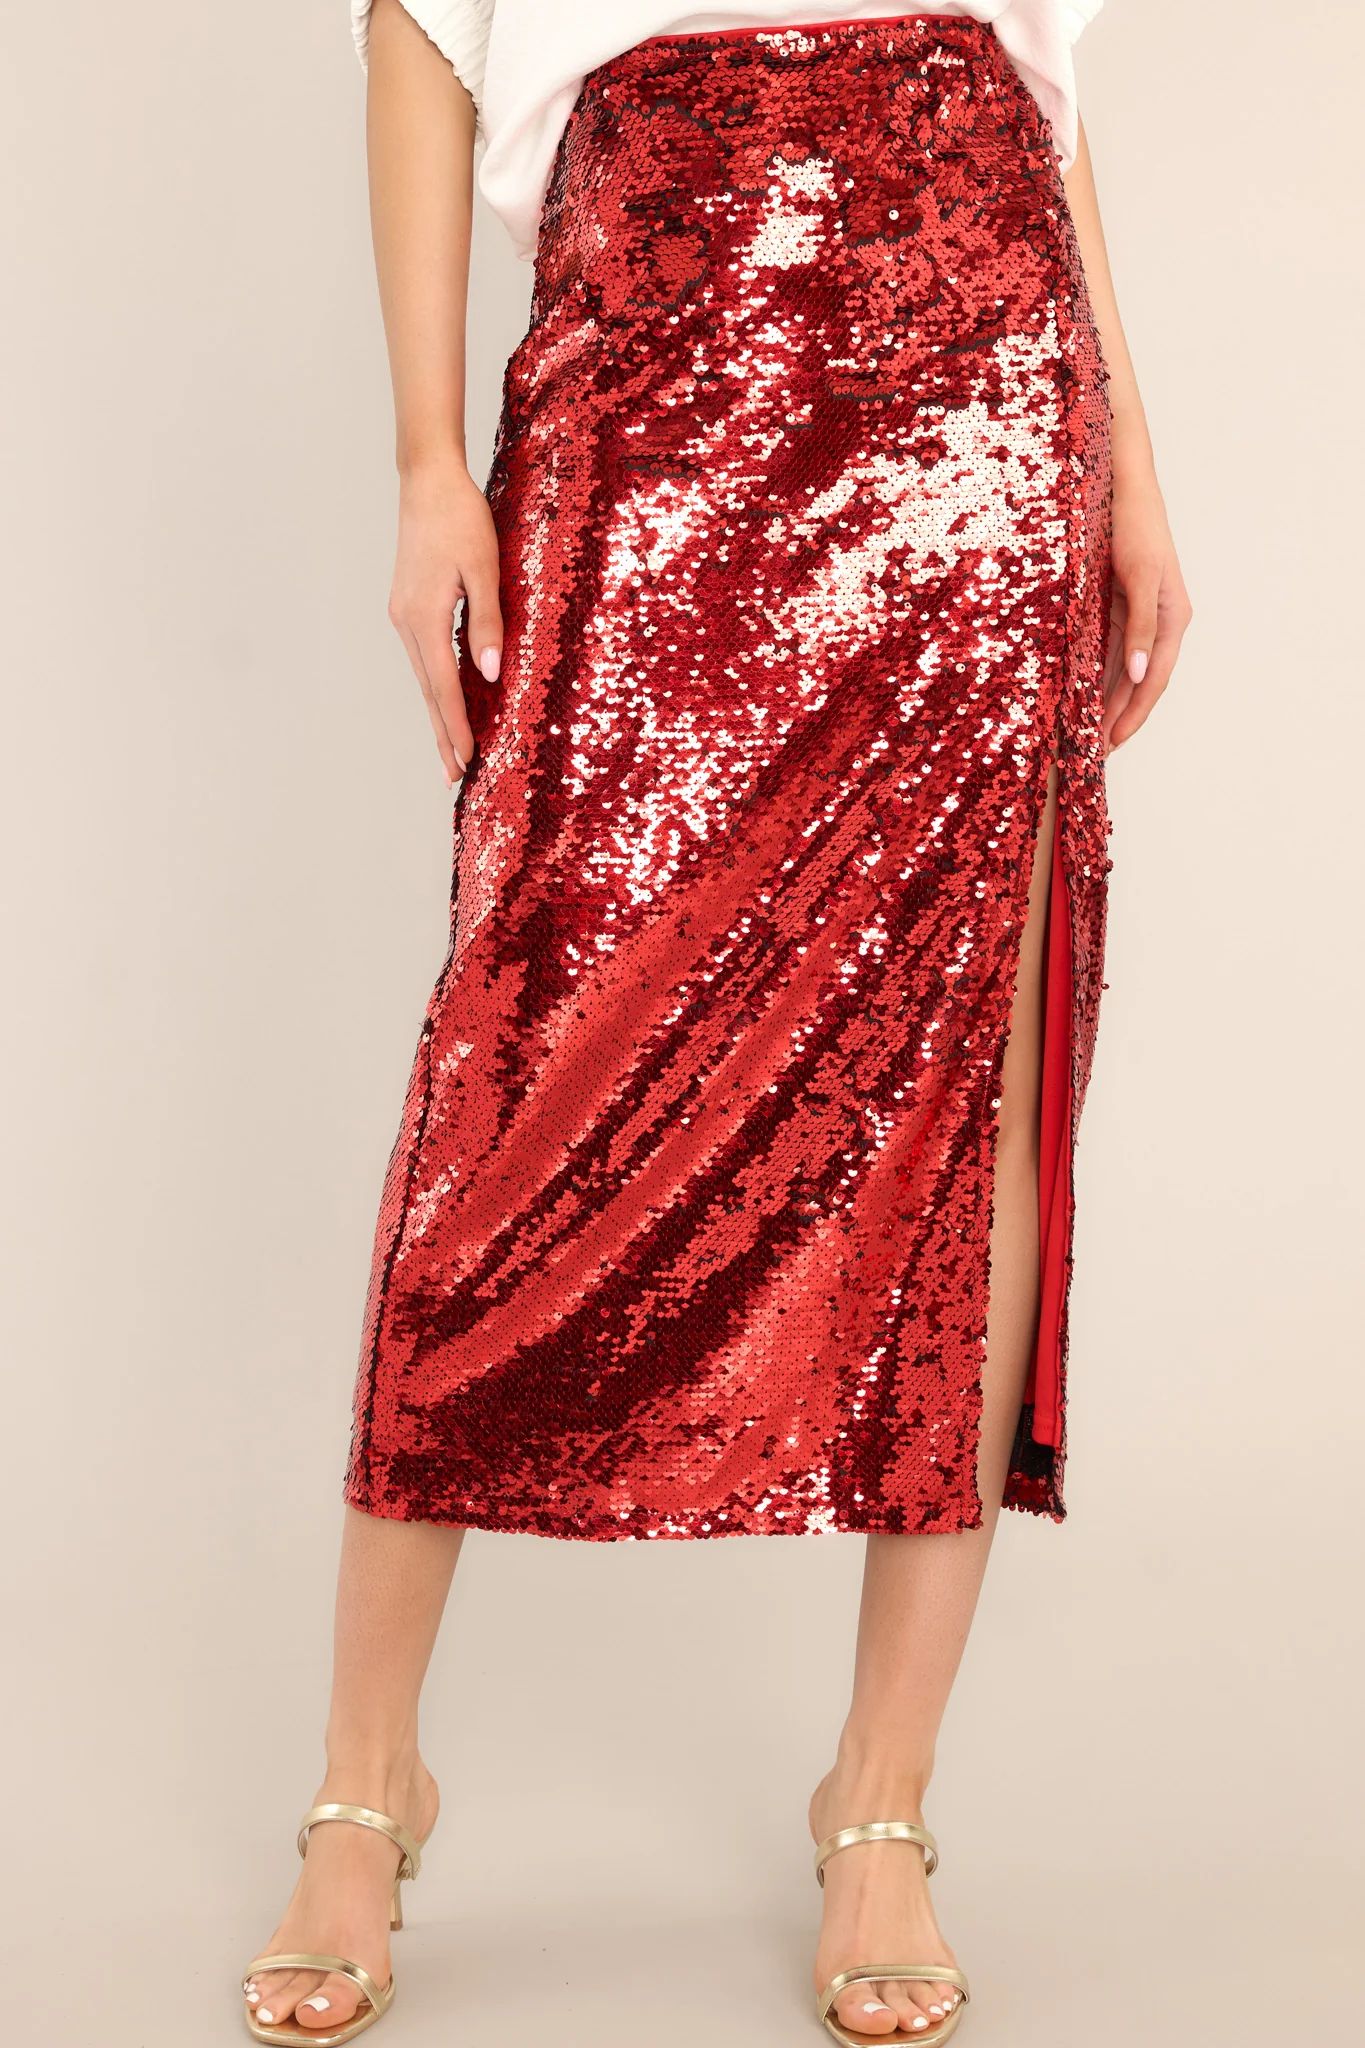 A Part Of It Red Sequin Midi Skirt | Red Dress 